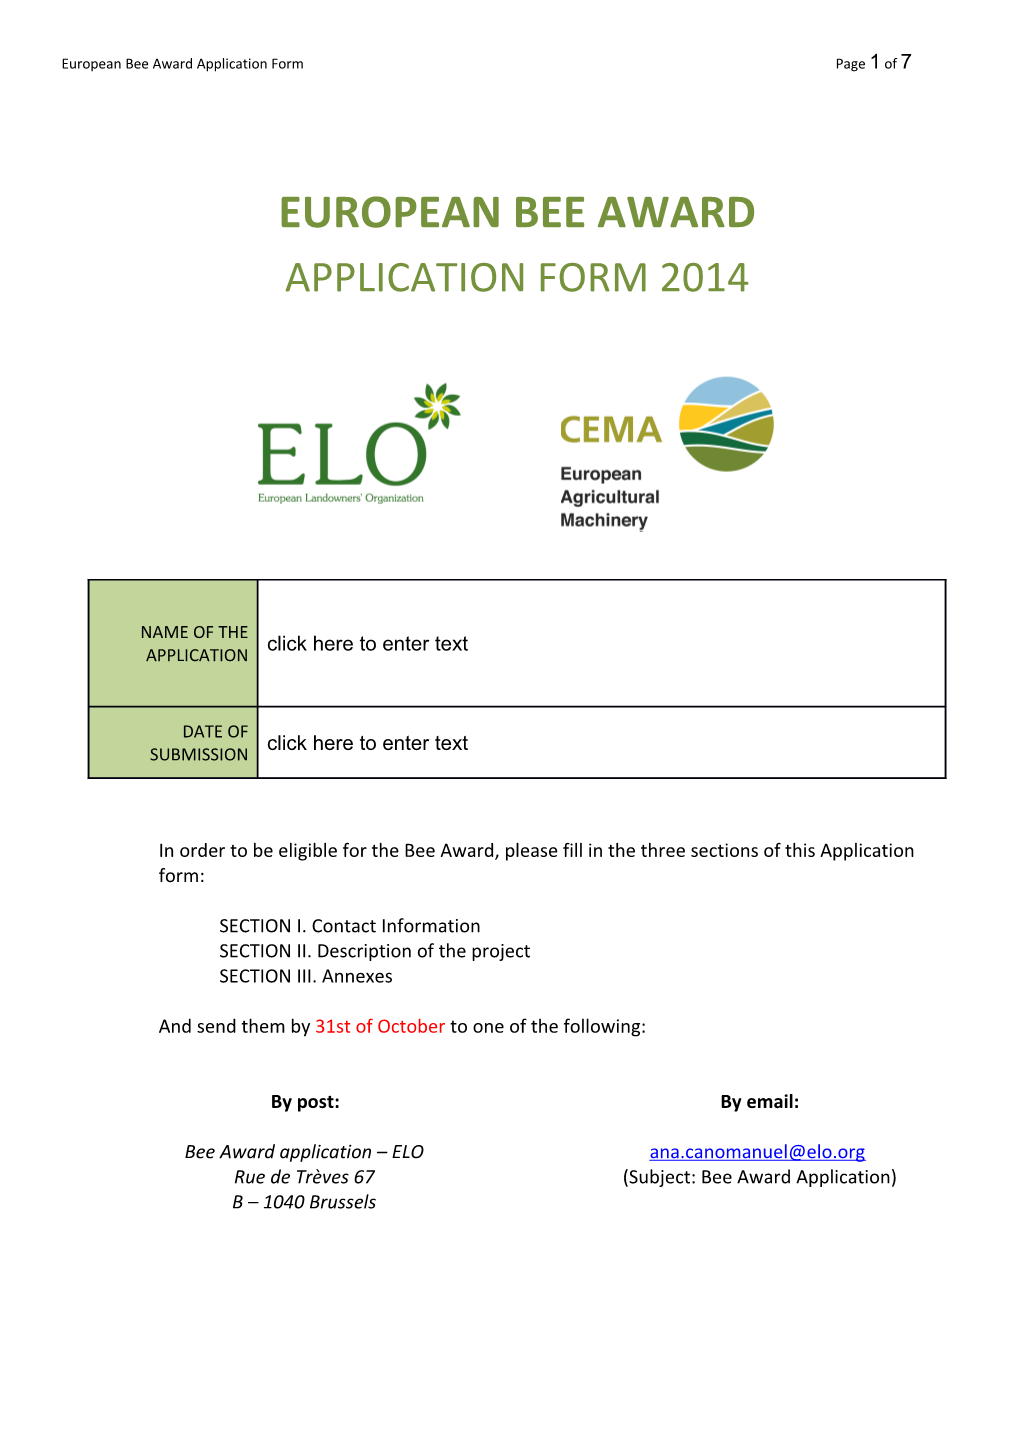 European Bee Award Application Form Page 1 of 10